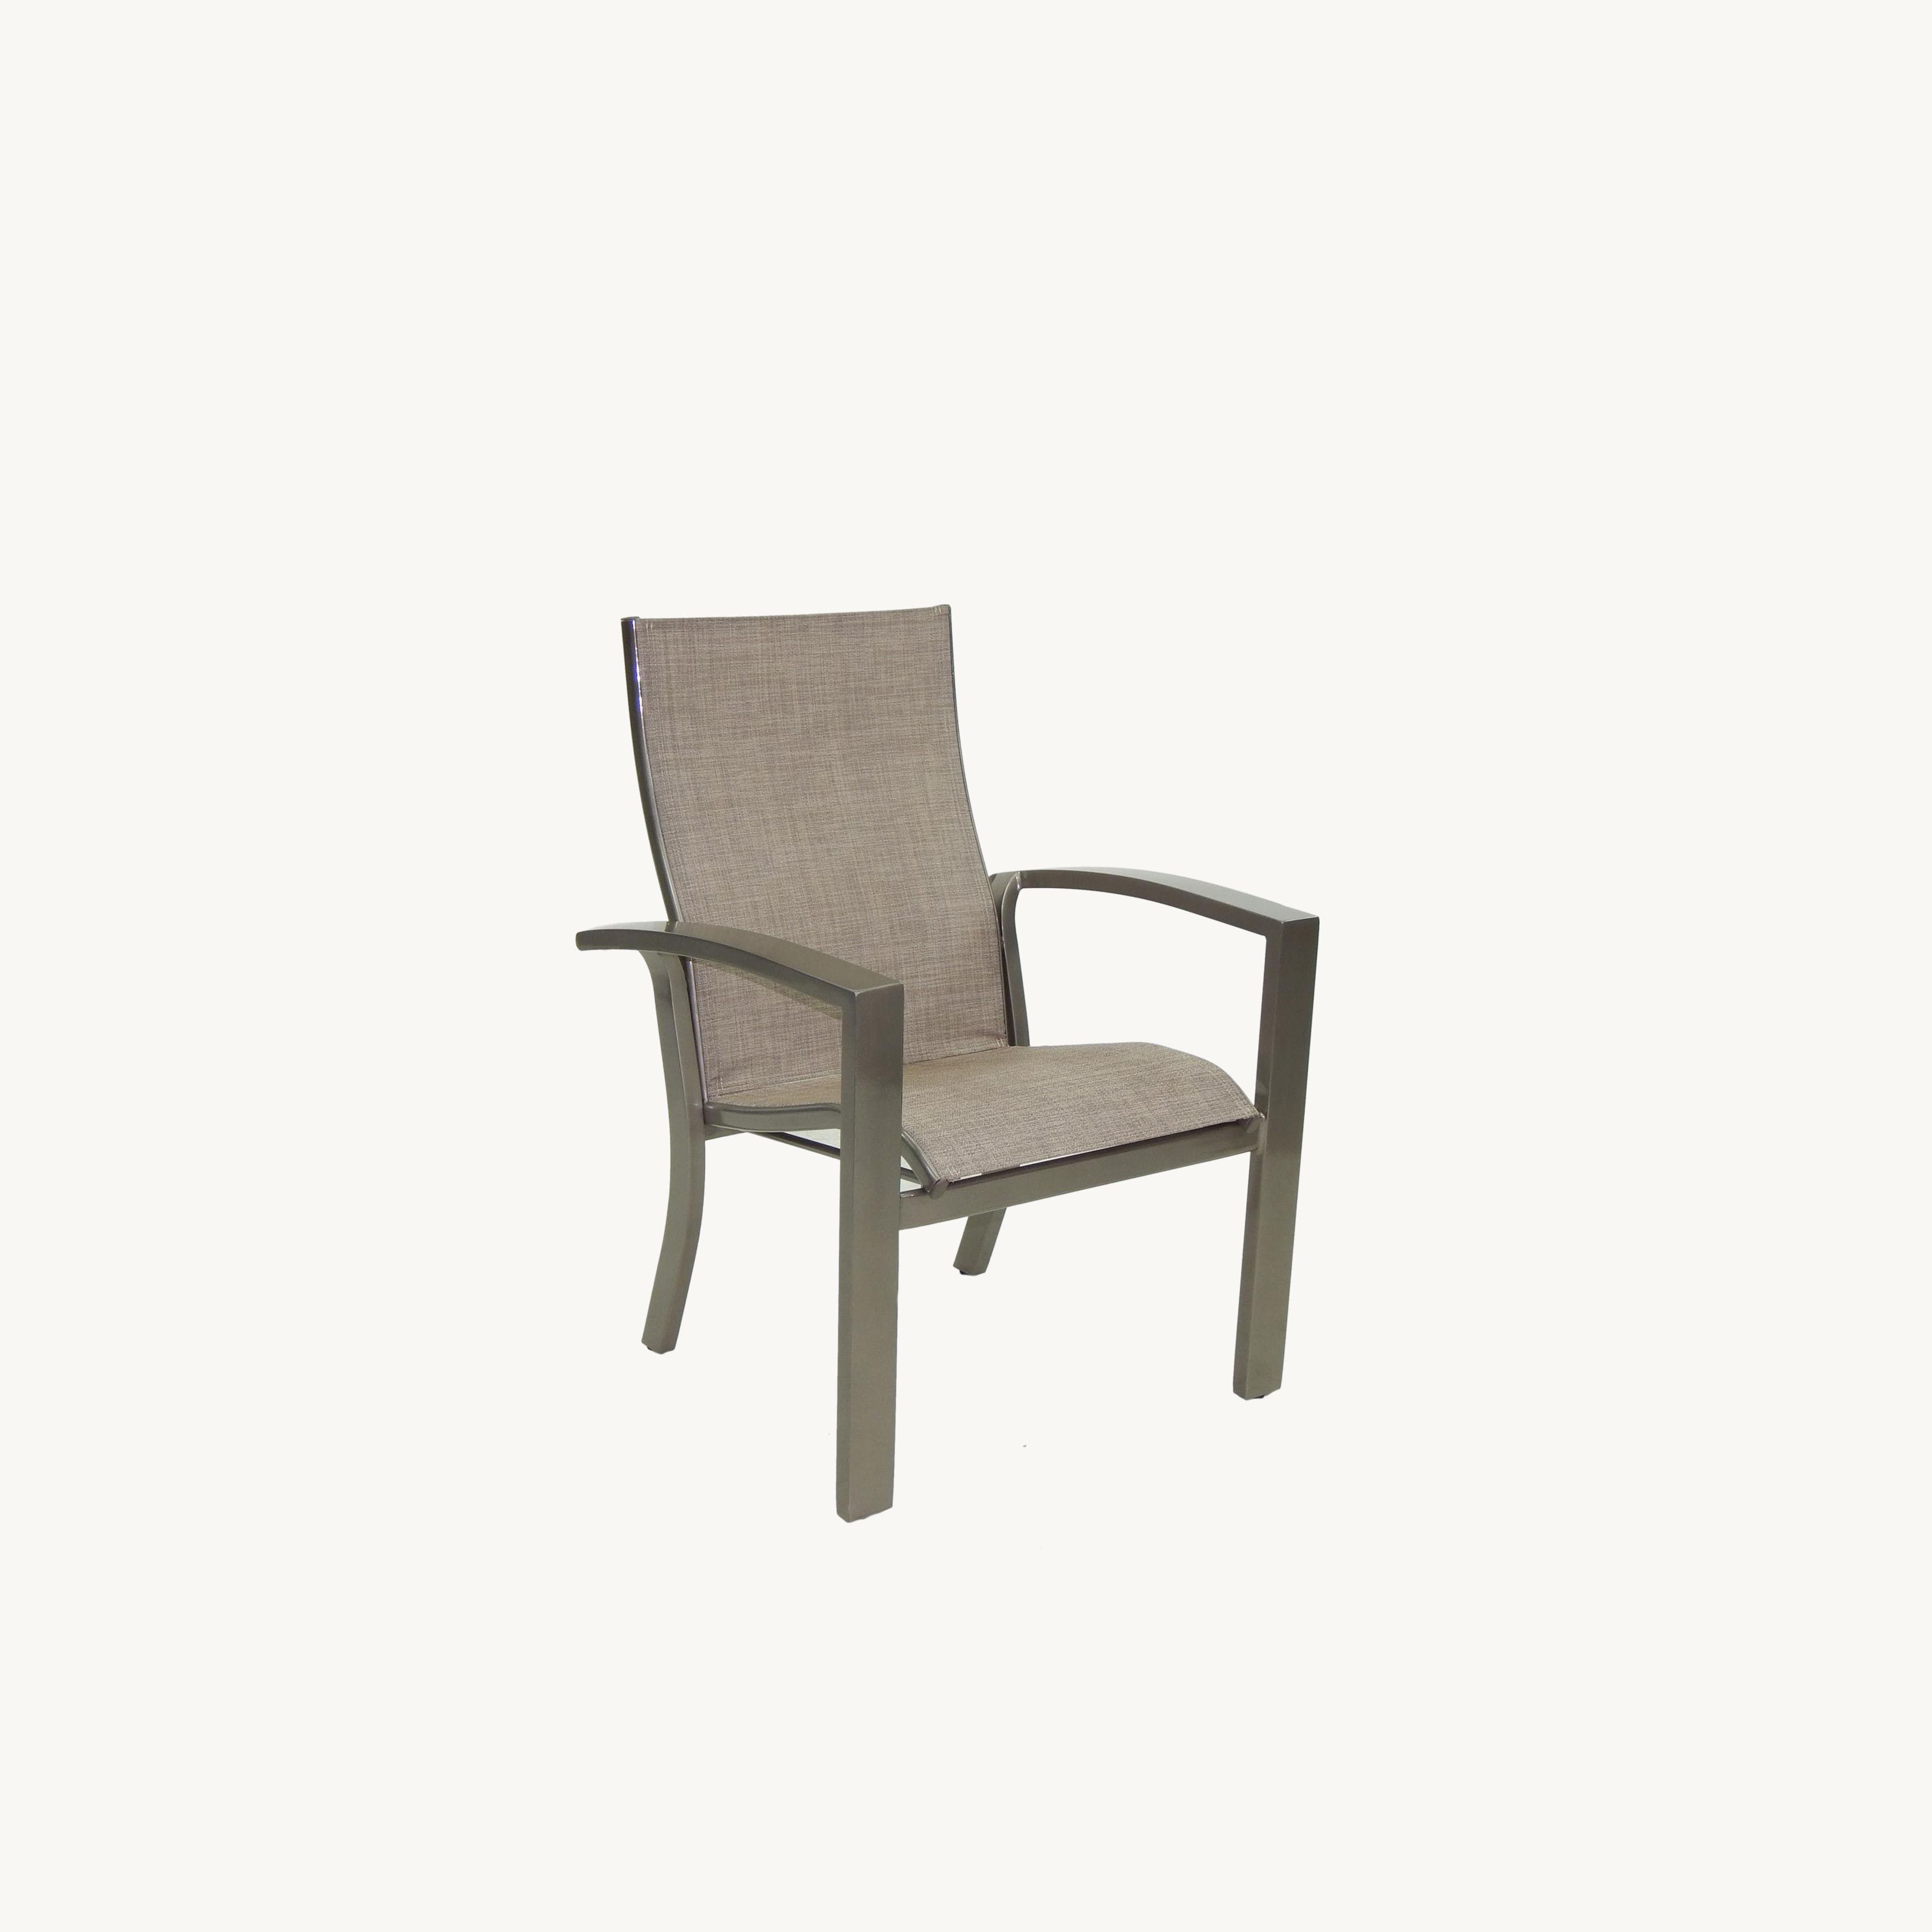 Orion Sling Dining Chair By Castelle